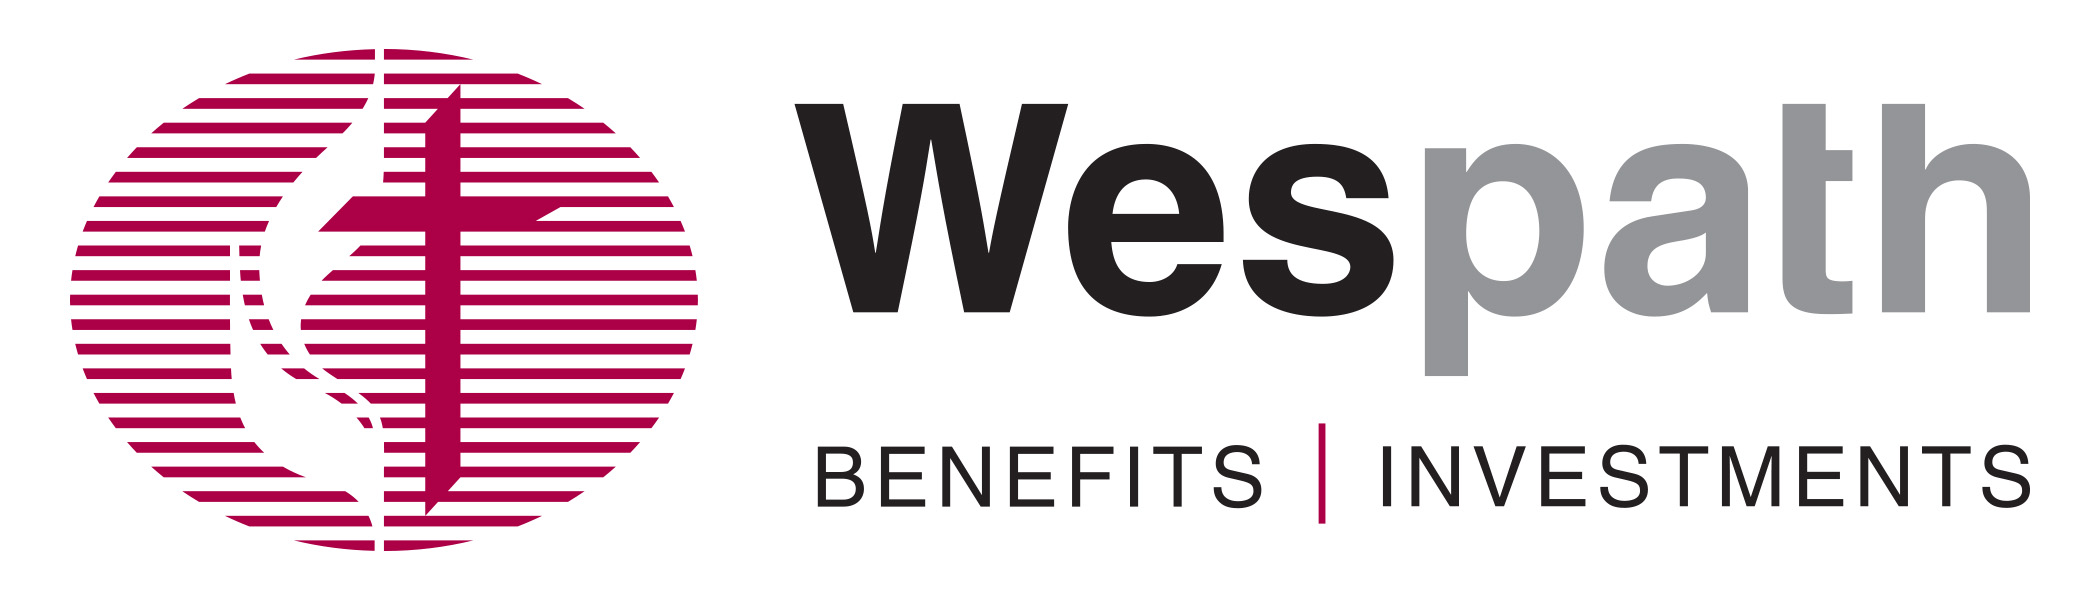 Wespath Benefits and Investments